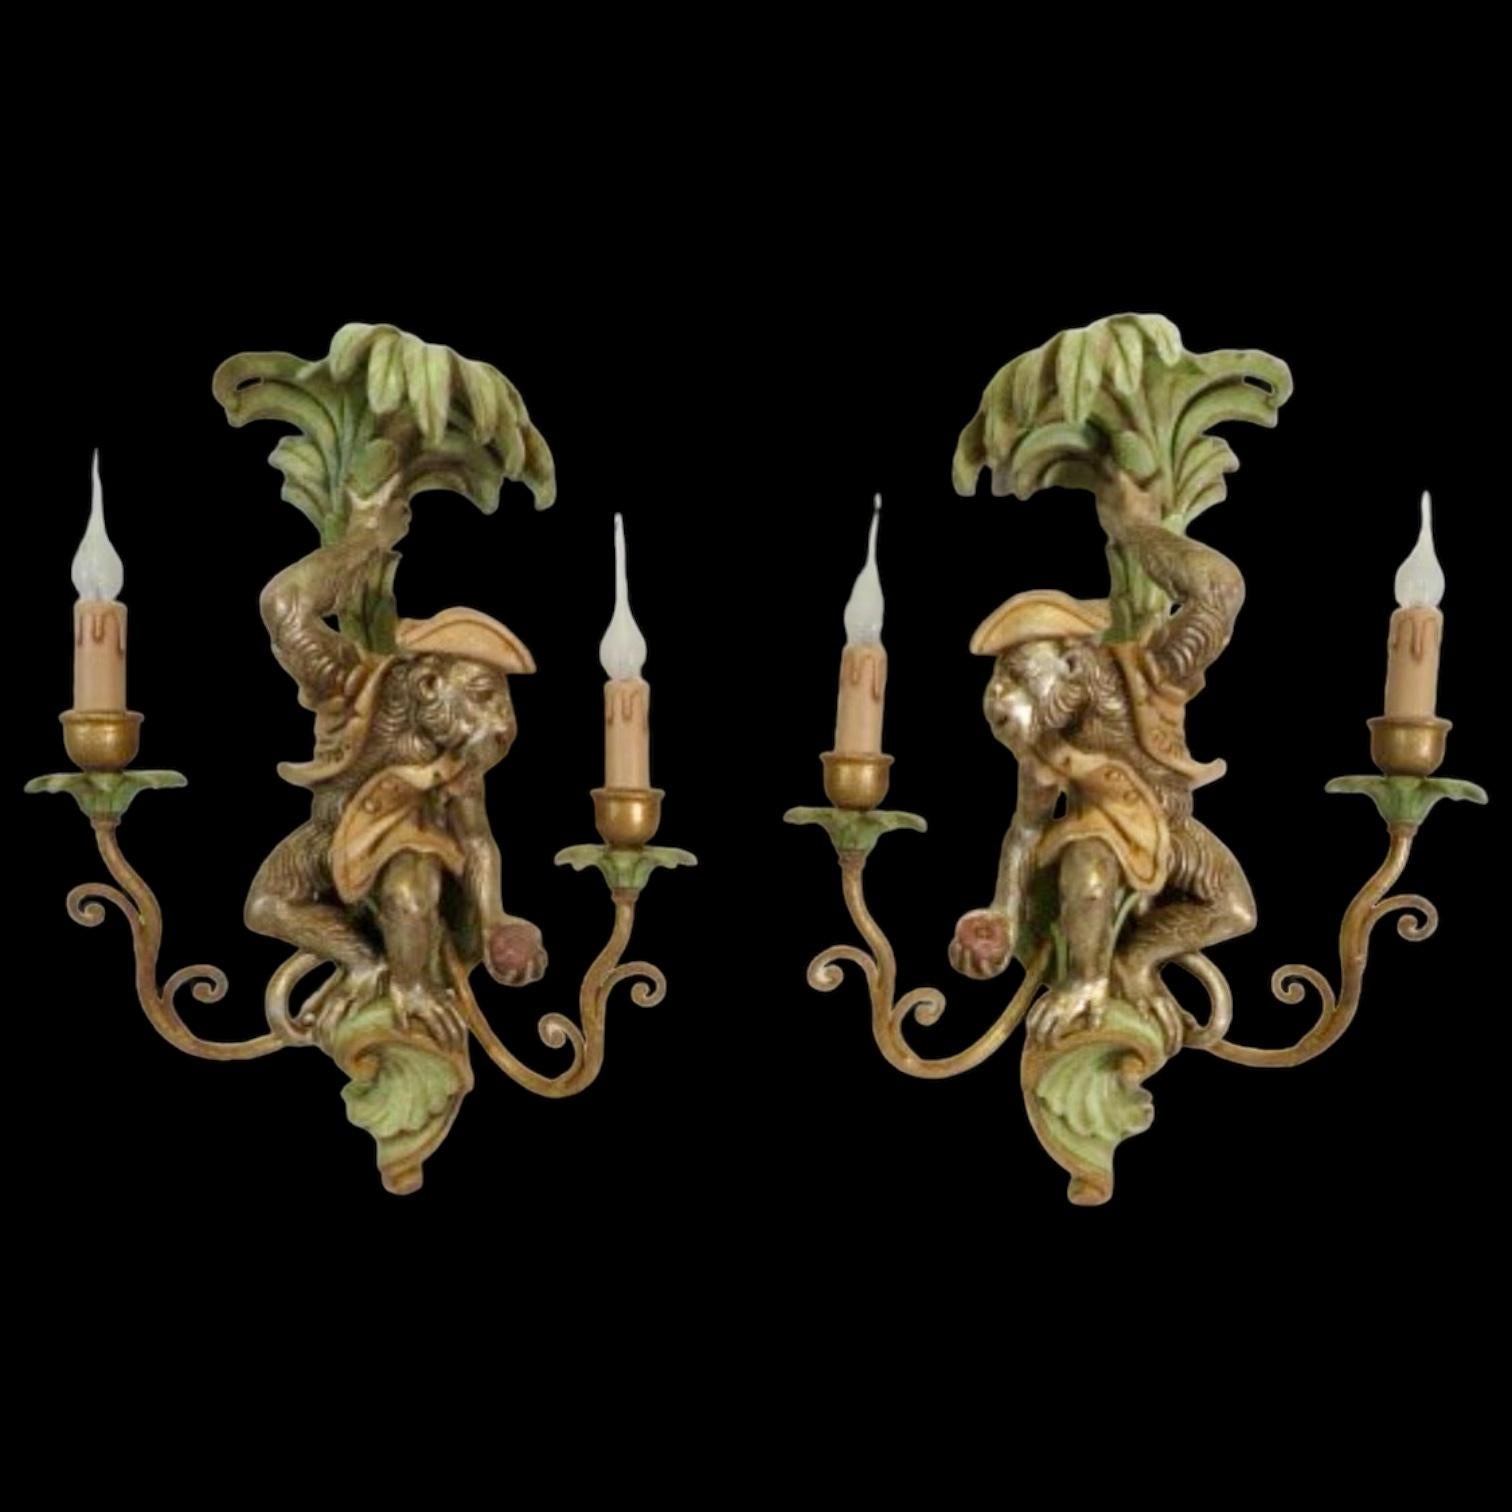 Decorative Crafts Italian Regency Style Carved Wood Monkey Palm Tree Sconces -2 In Good Condition For Sale In Kennesaw, GA